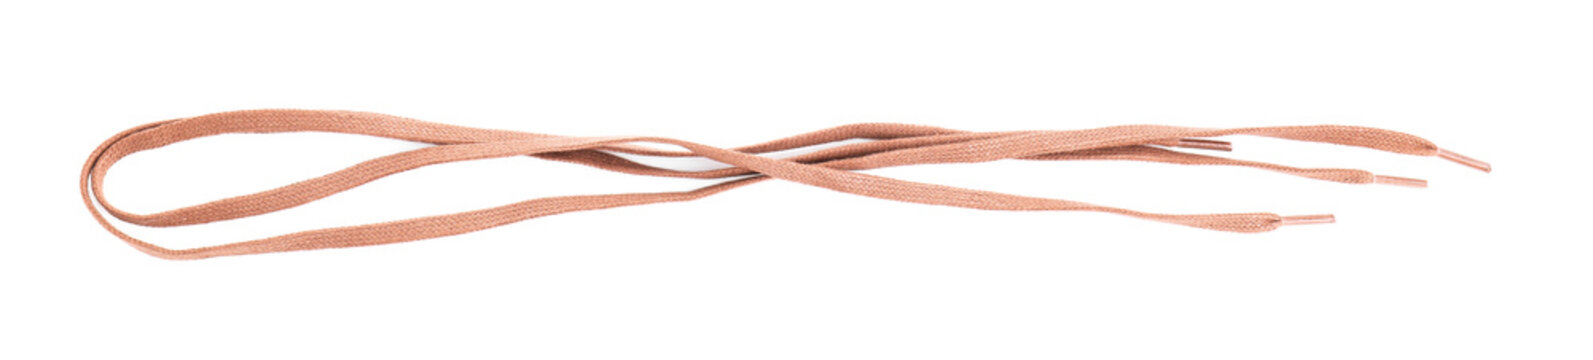 Light brown shoe laces isolated on white, top view